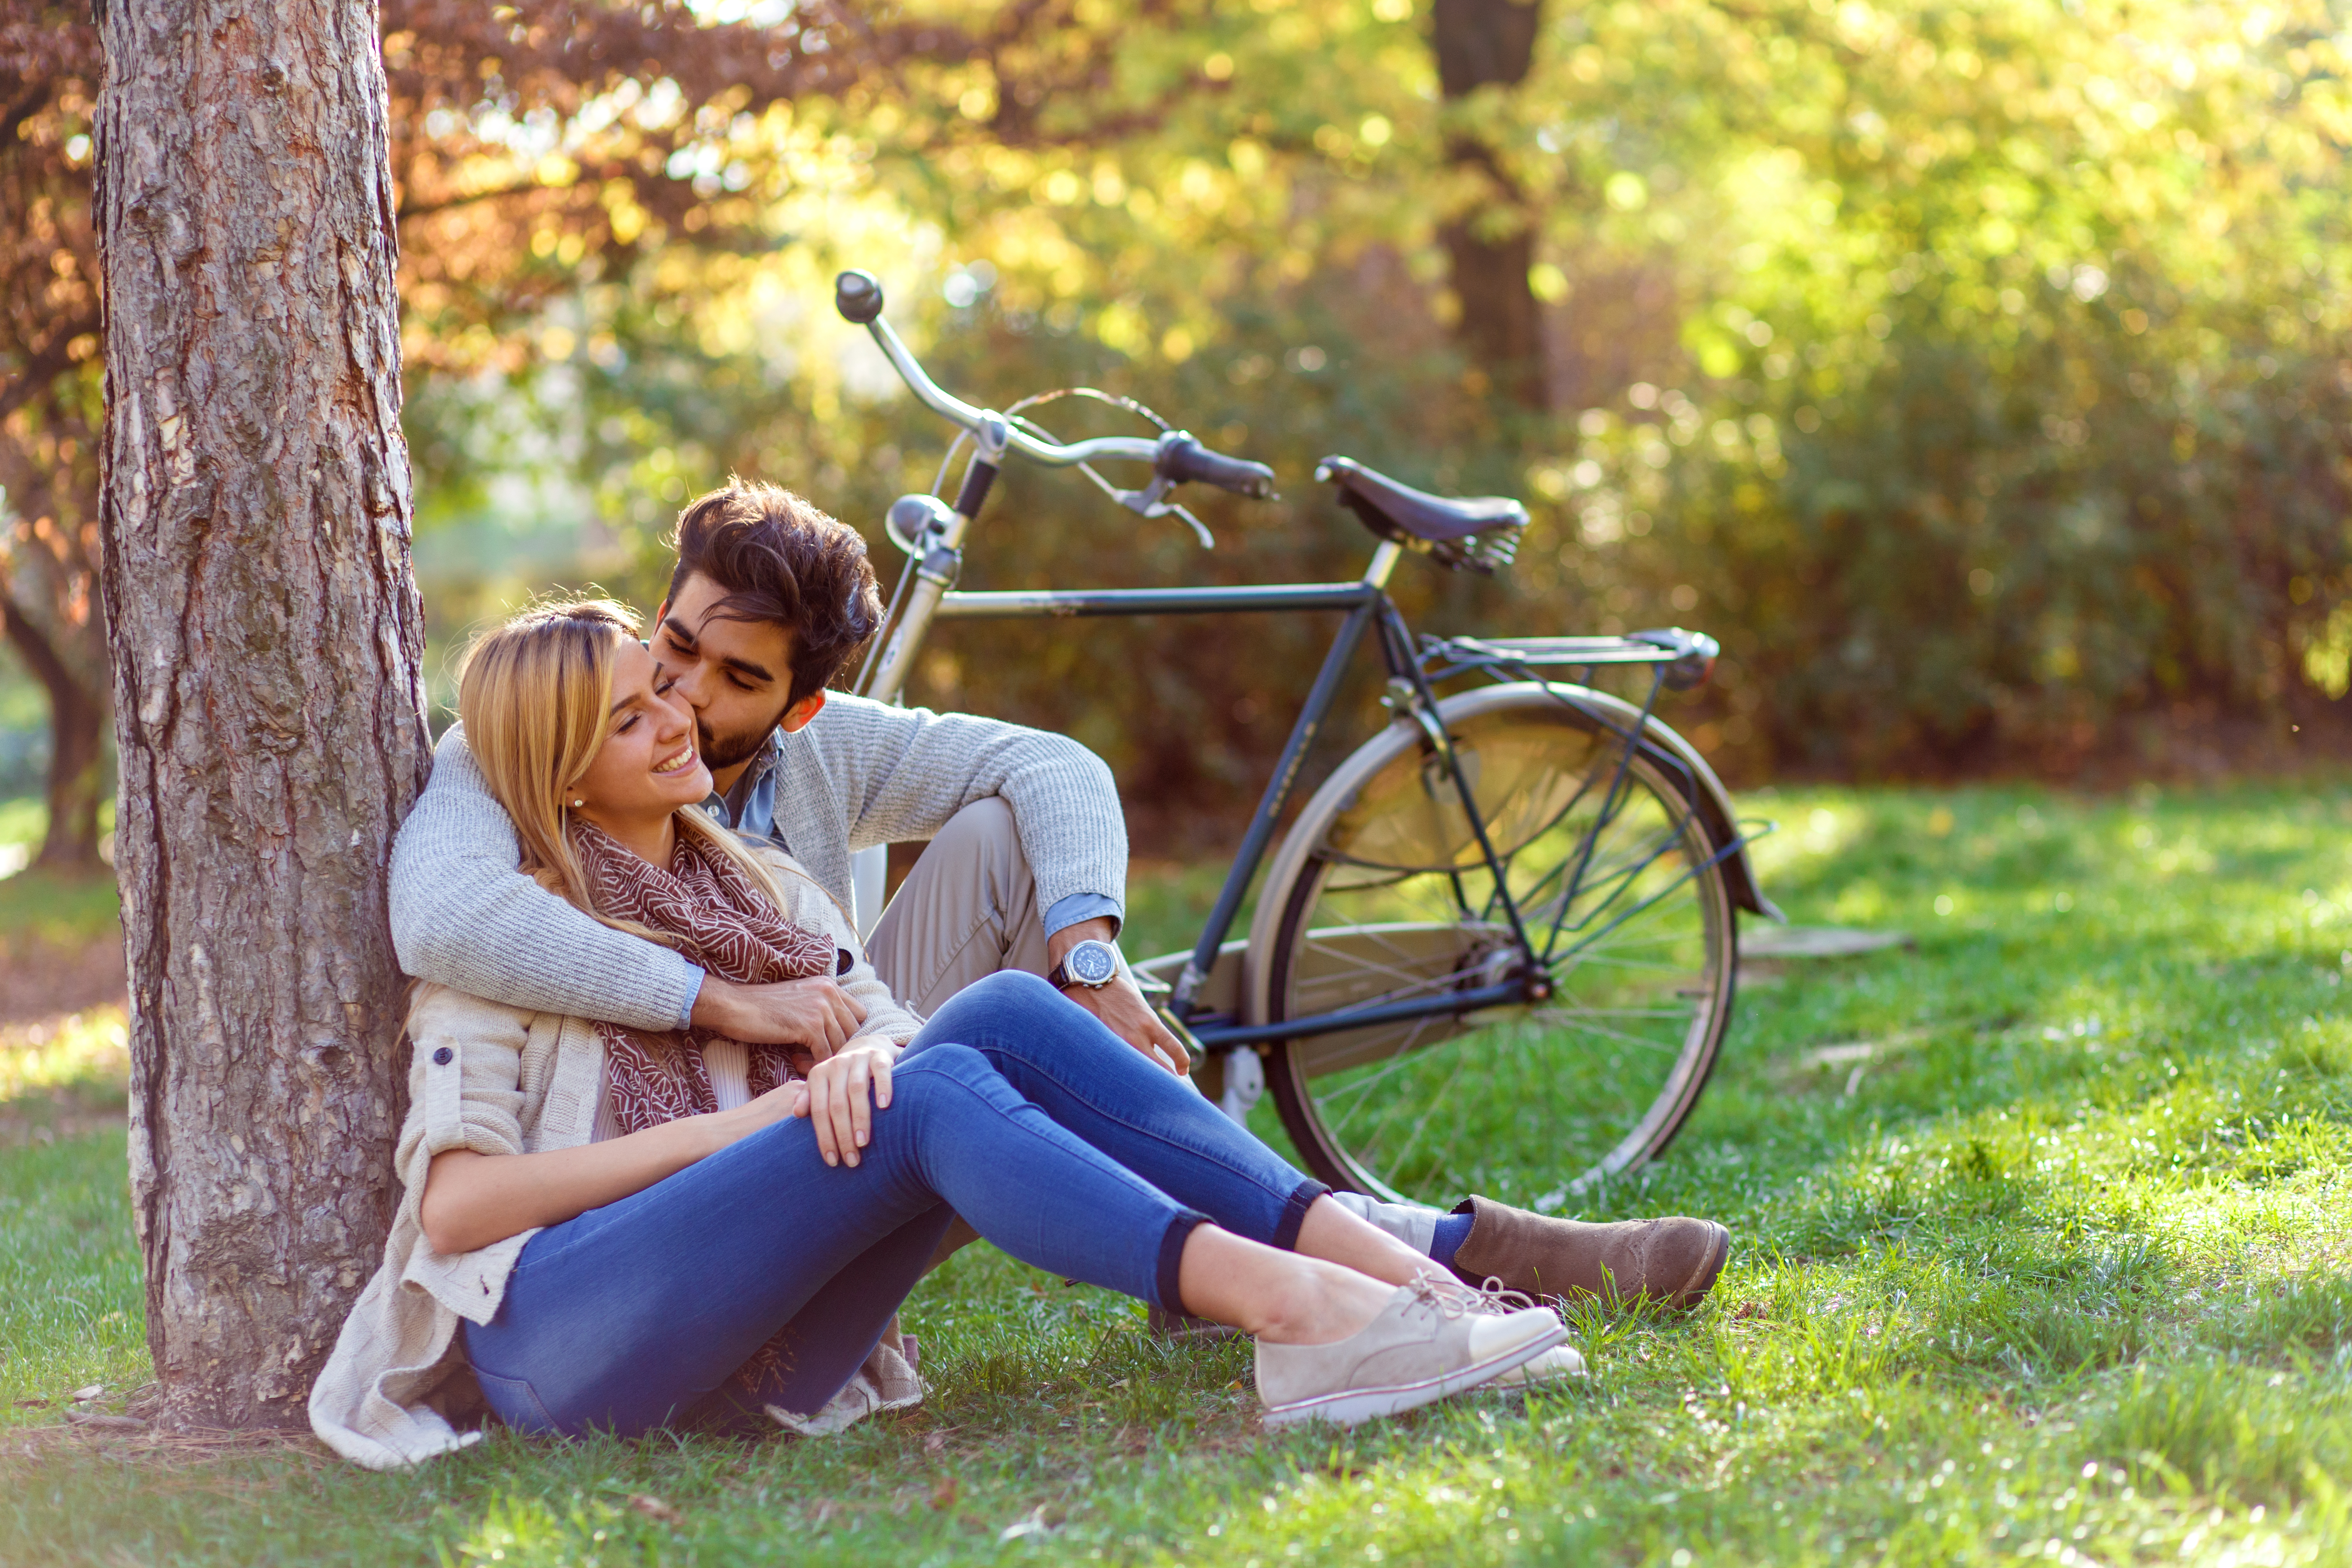 A young couple in love pictured sitting in a park while leaning against a tree and embracing one another | Source: Shutterstock